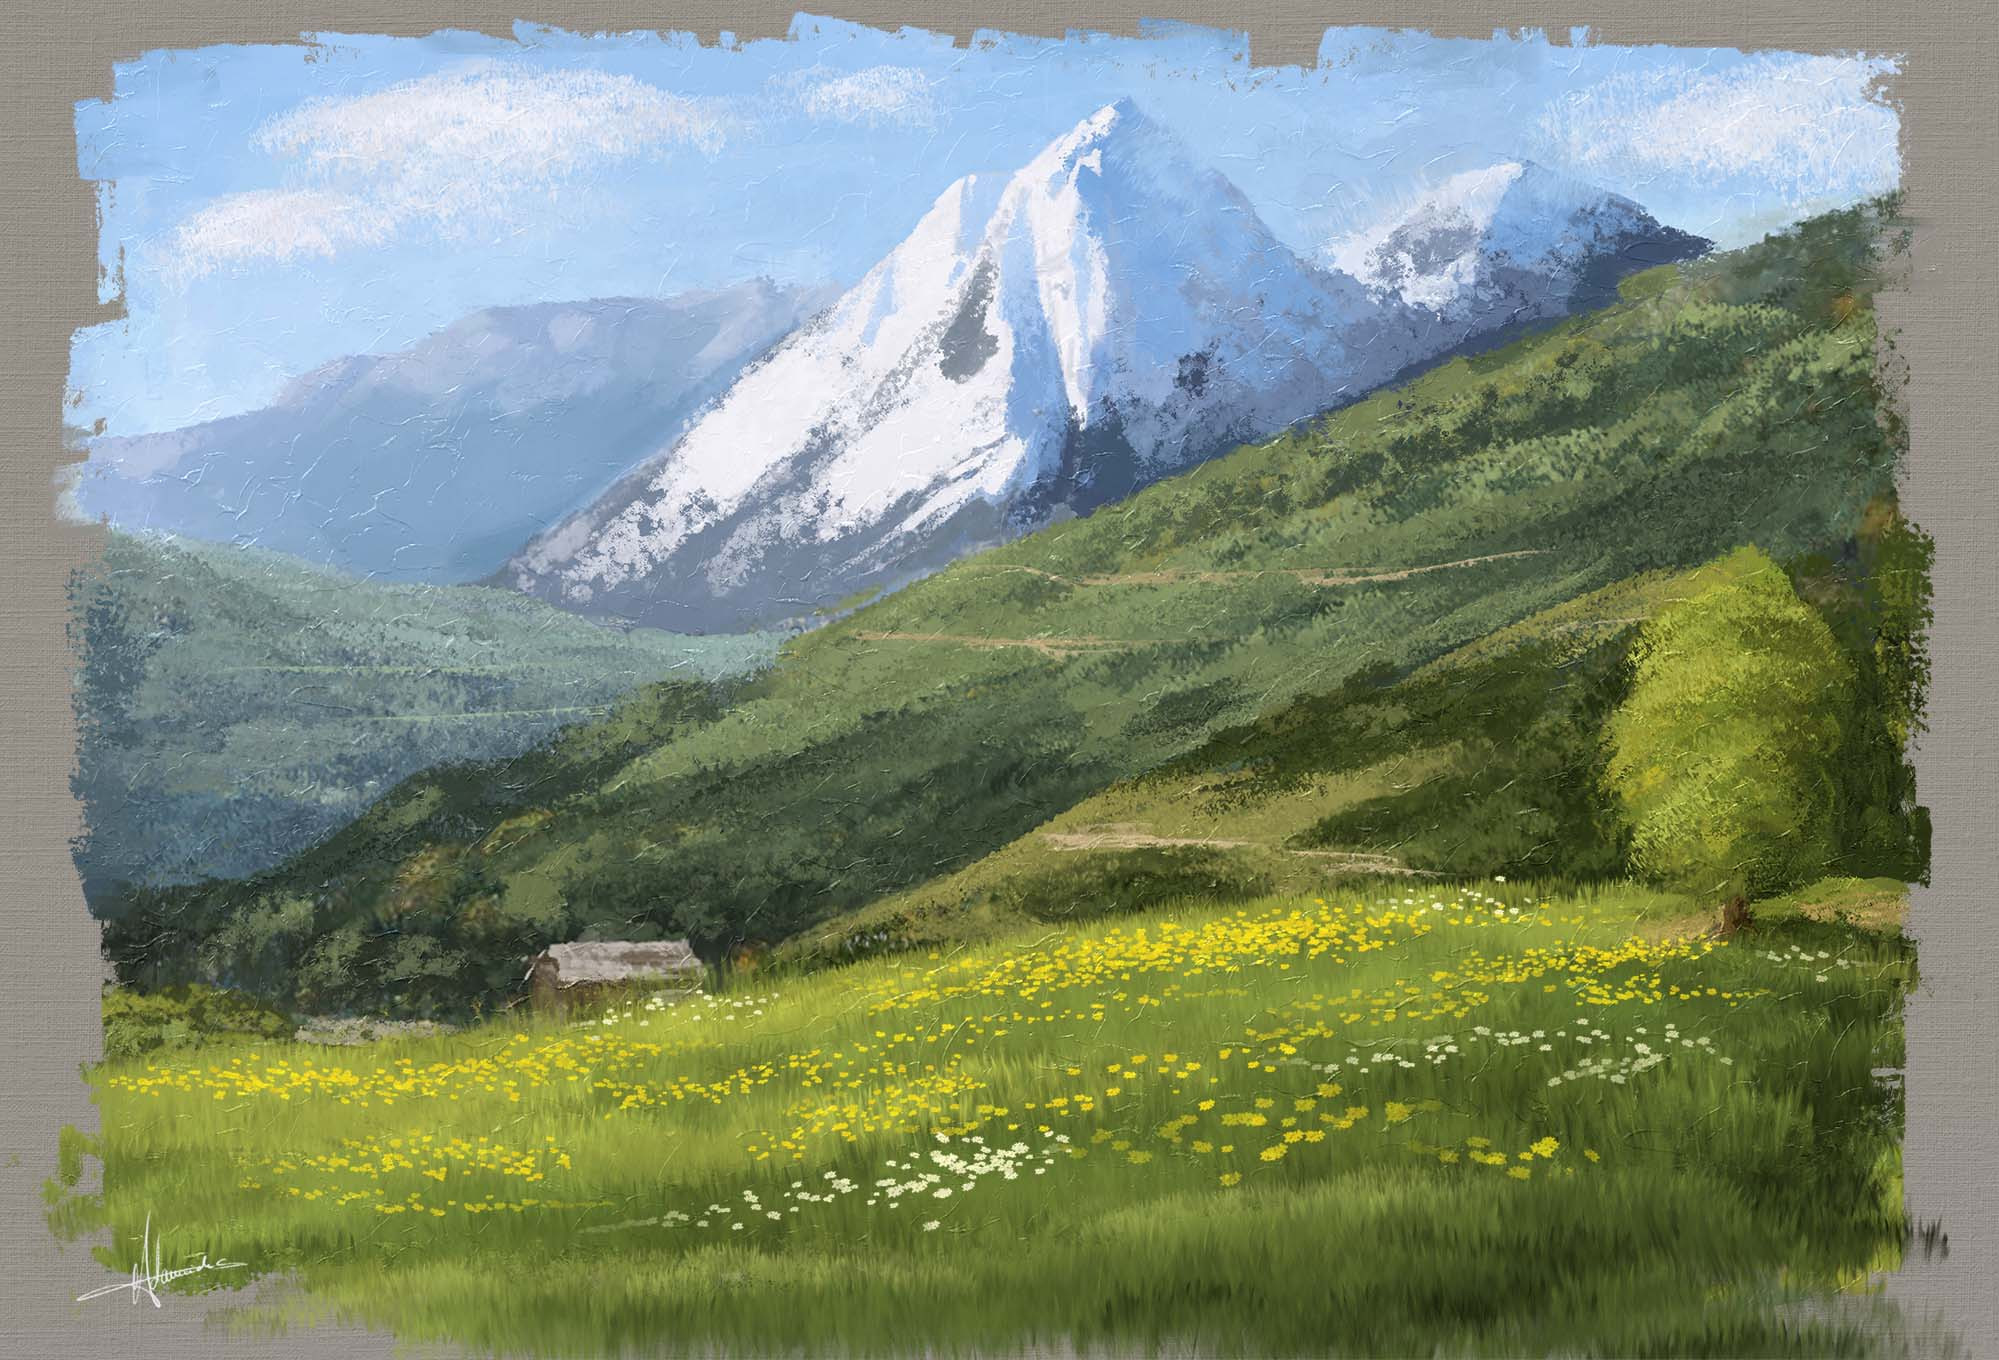 Concept Art and Photoshop Brushes - Digital Landscape Oil Painting